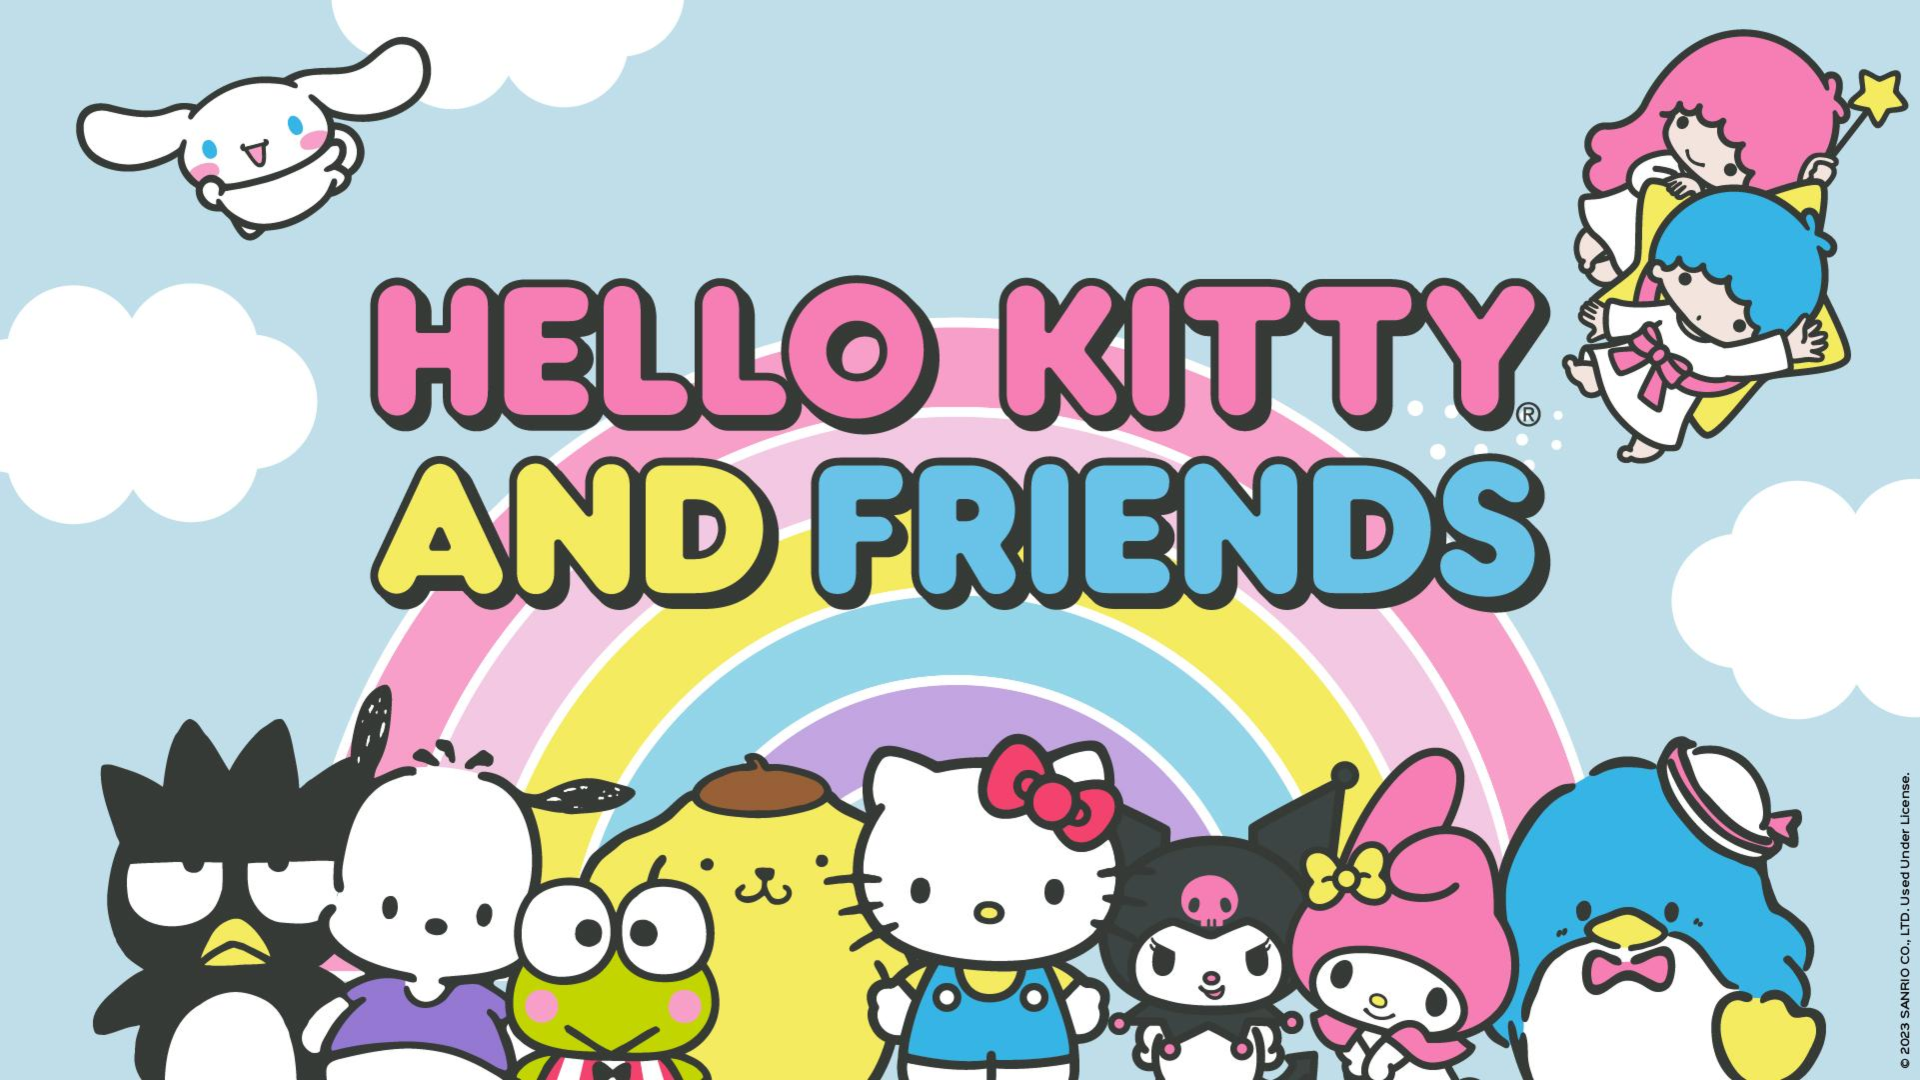 Hello Kitty Is Becoming an NFT